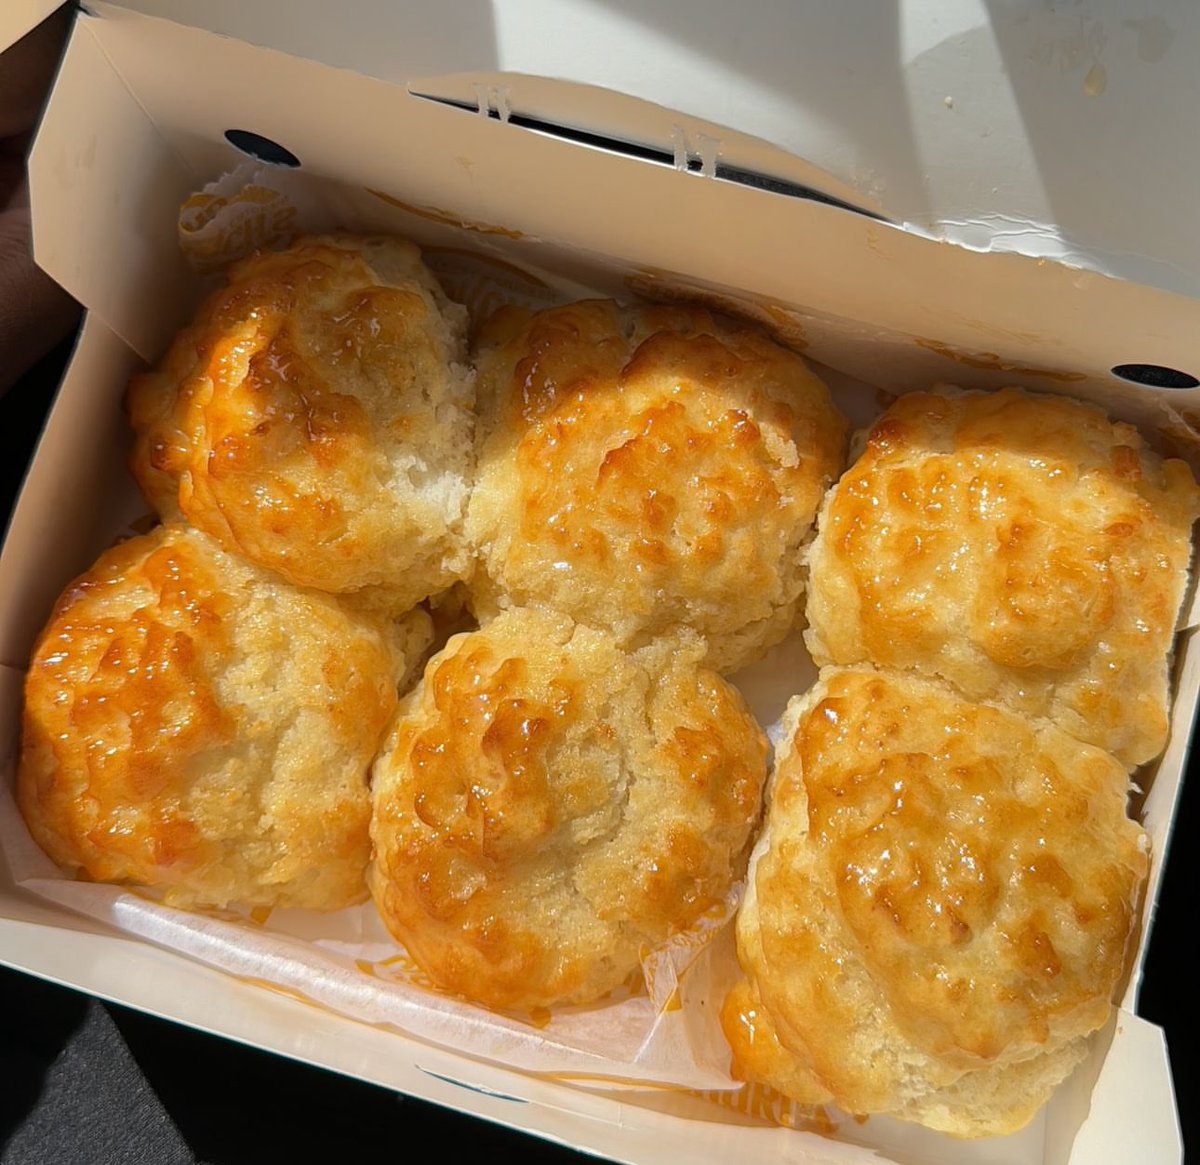 Listen, Church’s Honey Buttered Biscuits are delicious.